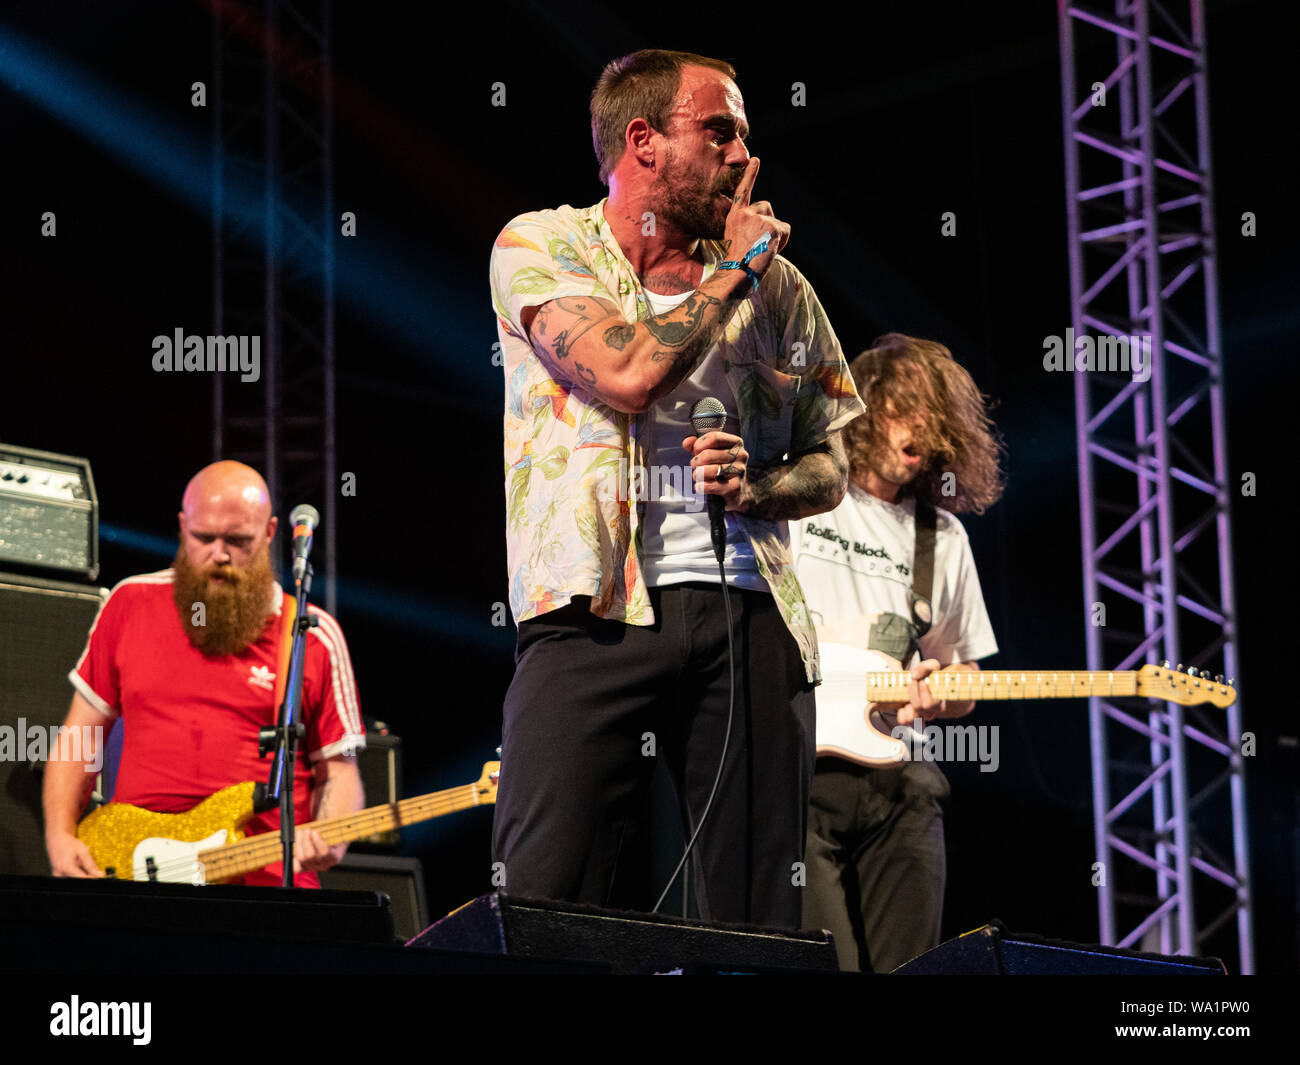 Alges, PORTUGAL: Idles performing live on the 3rd and last day of Festival NOS Alive in Alges, Saturday, Jul. 13, 2019. Featuring: Joe Talbot, Lee Kiernan, Adam Devonshire Where: Lisboa, Portugal When: 13 Jul 2019 Credit: Rui M Leal/WENN.com Stock Photo